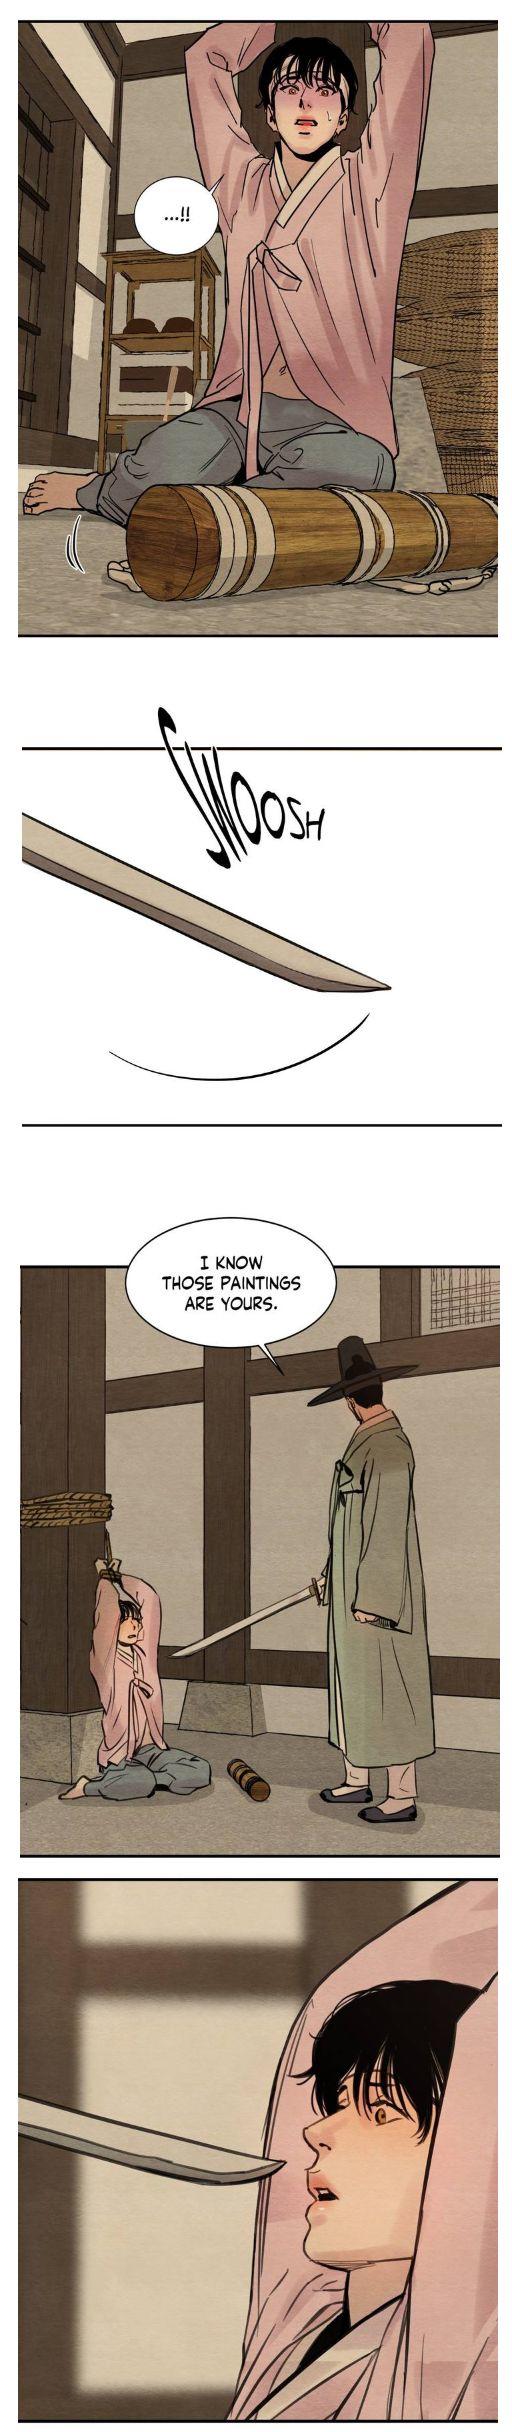 Painter Of The Night - Chapter 1 - 19 